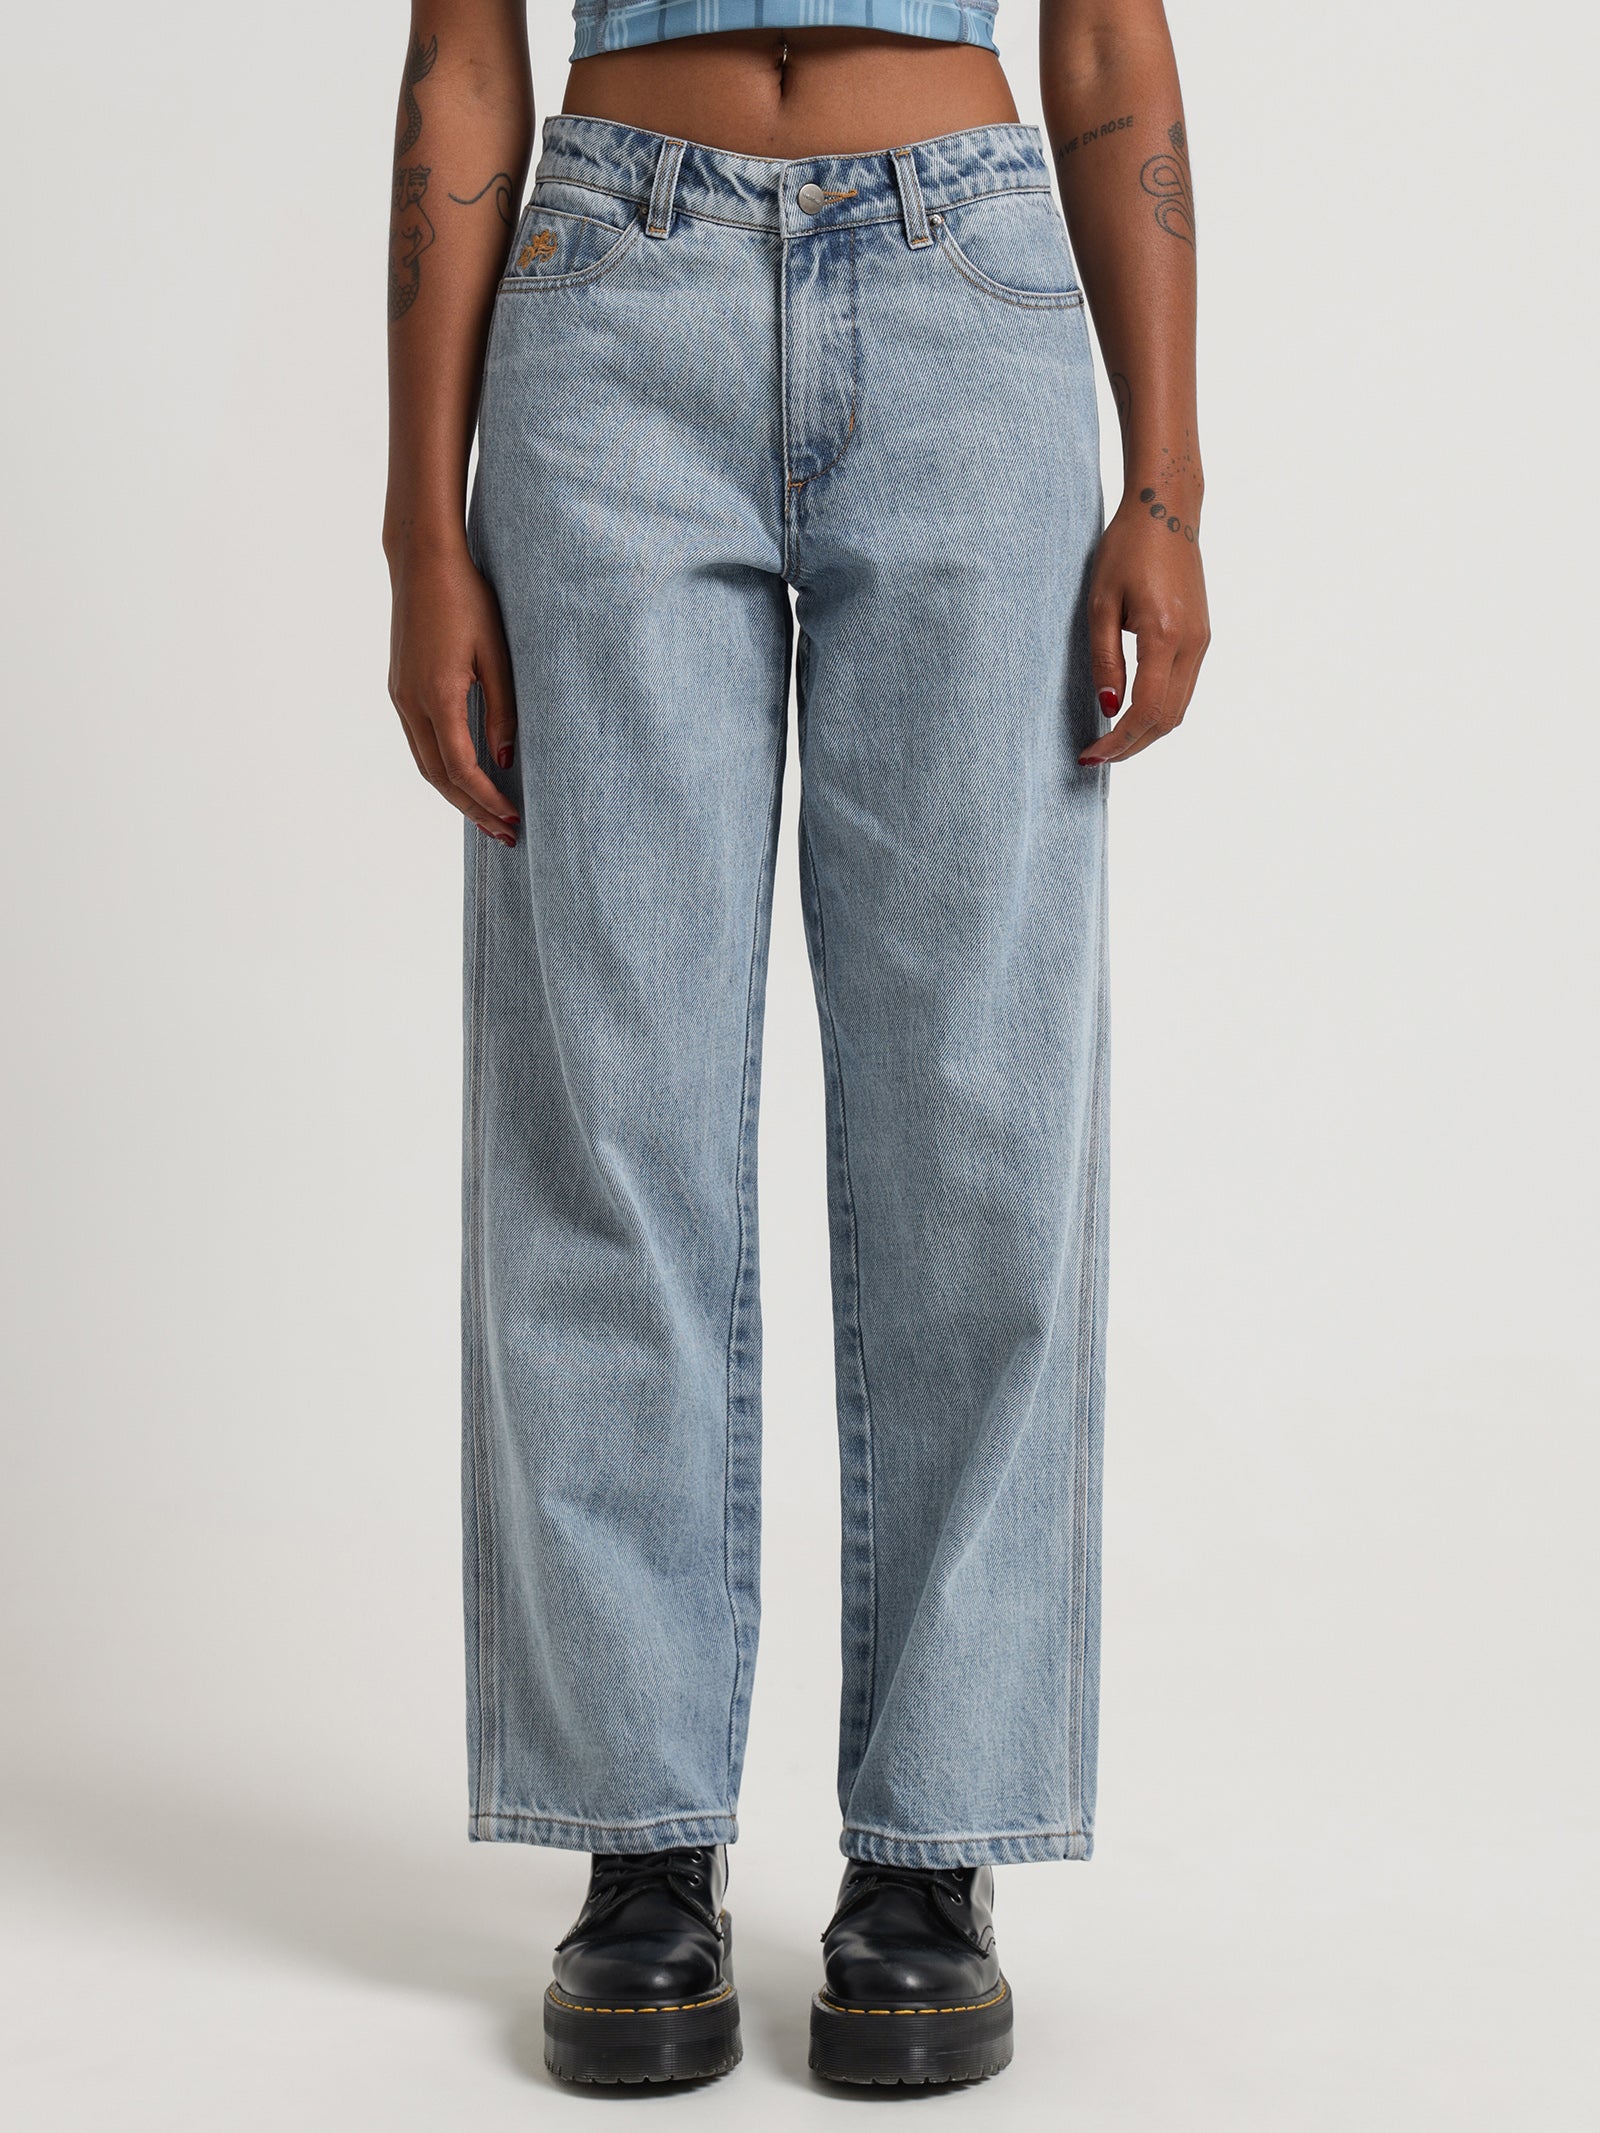 Hangtime Sloucher Jeans in Worship Blue Dust - Glue Store